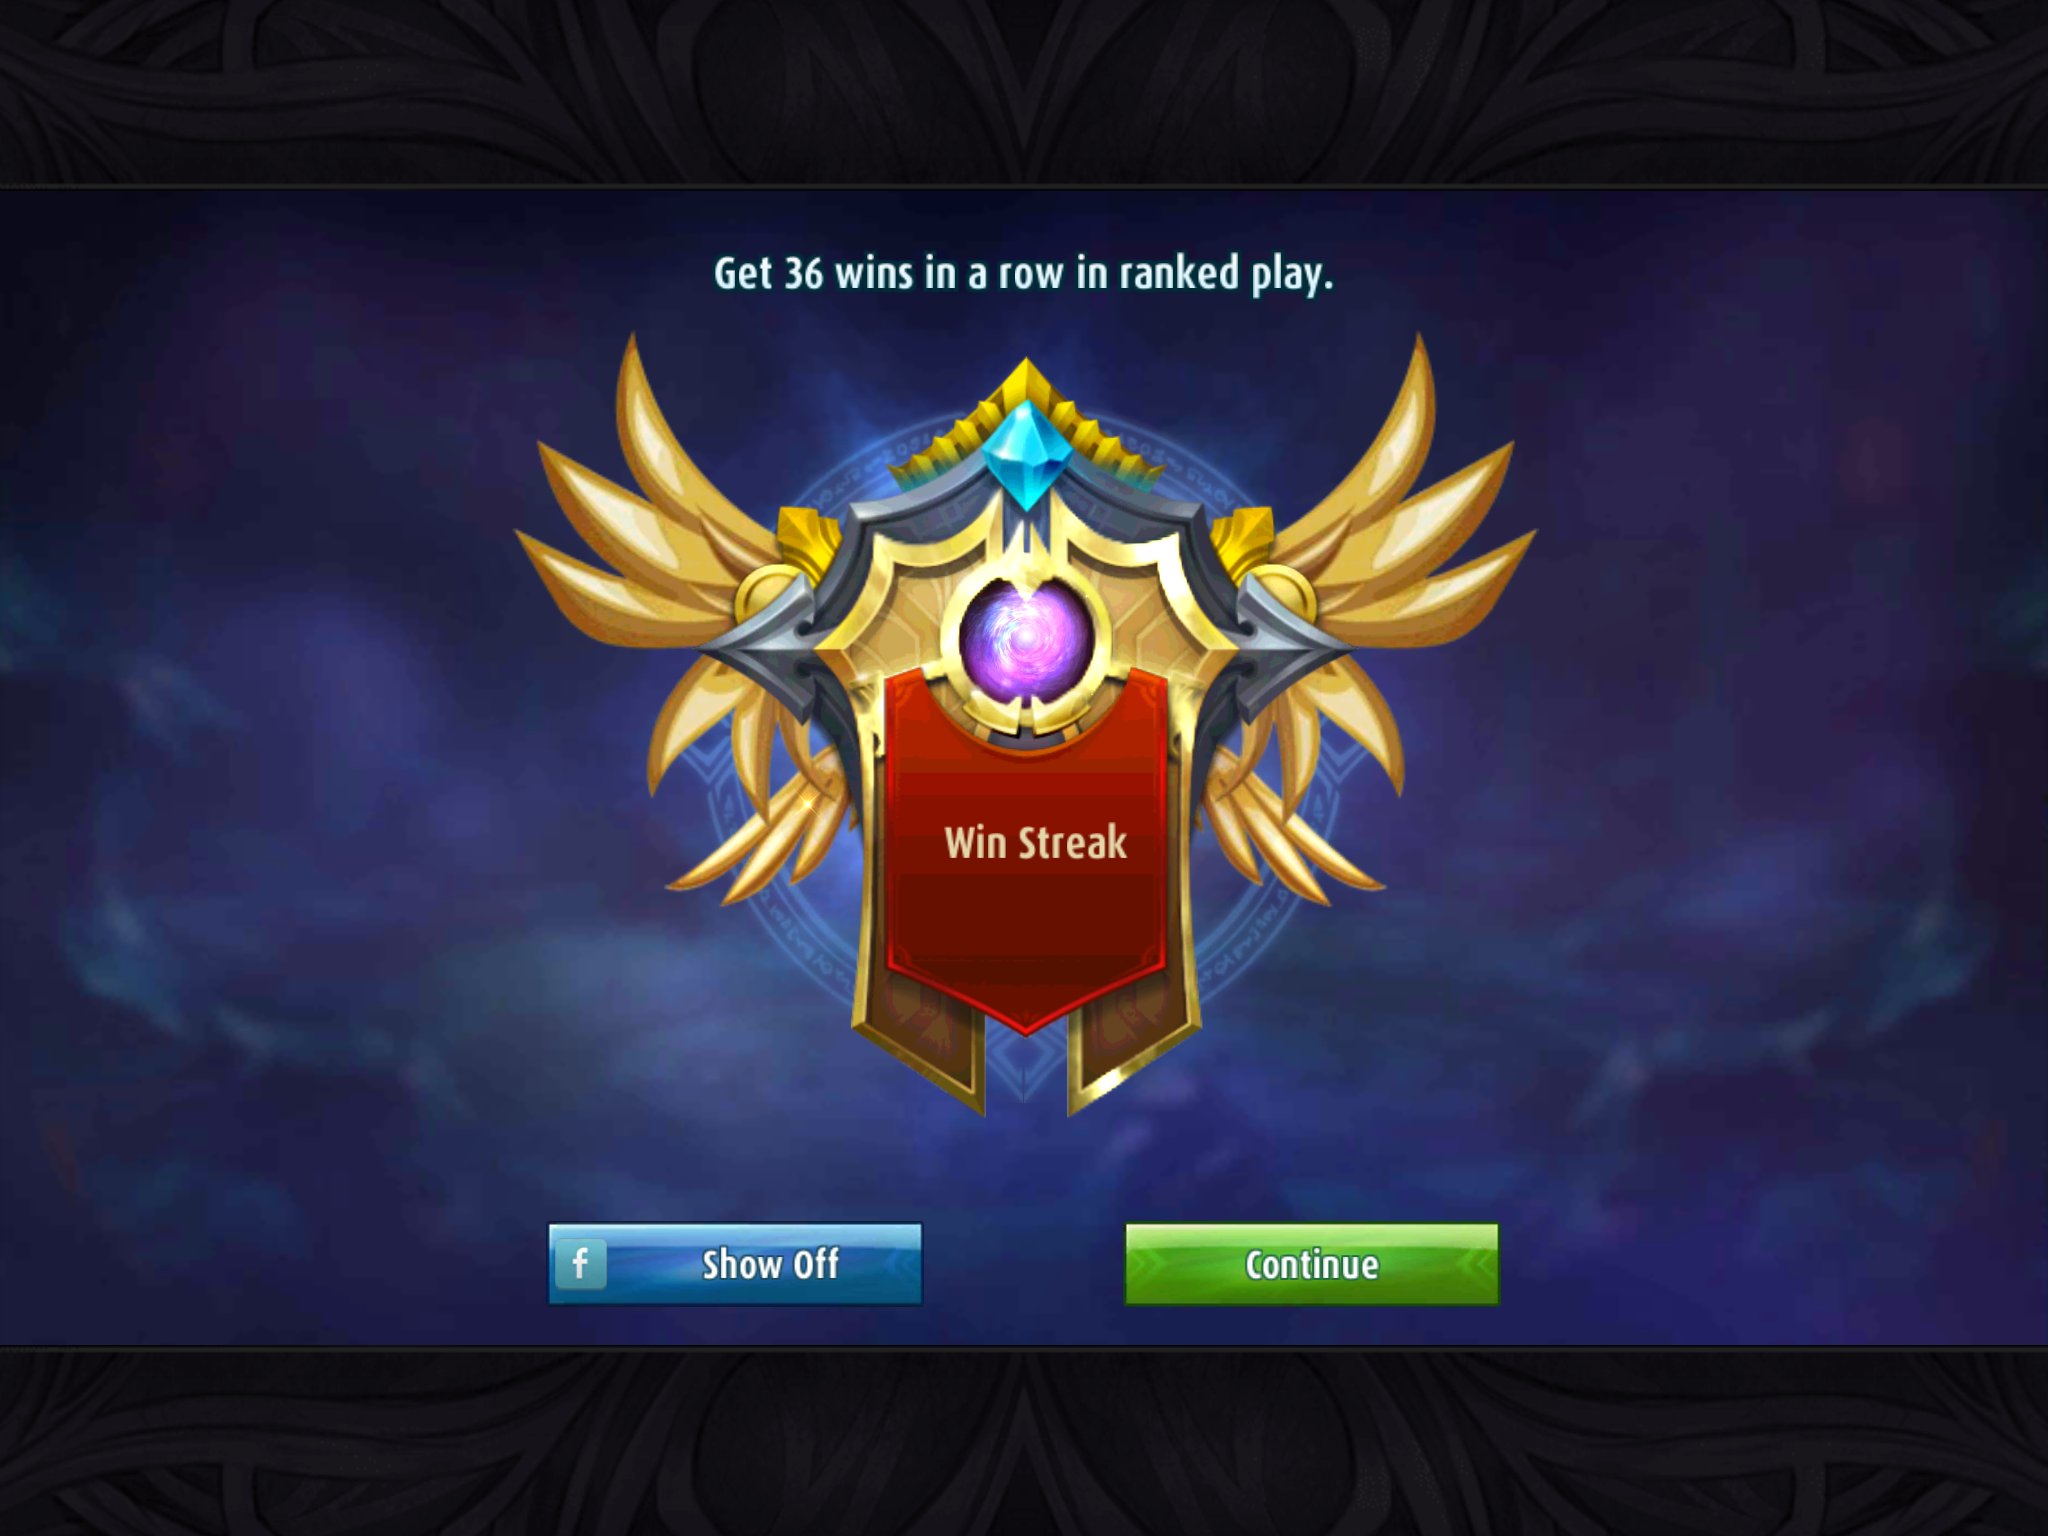 Mobile Legends On Twitter 36 WINS IN A ROW Wait Are You